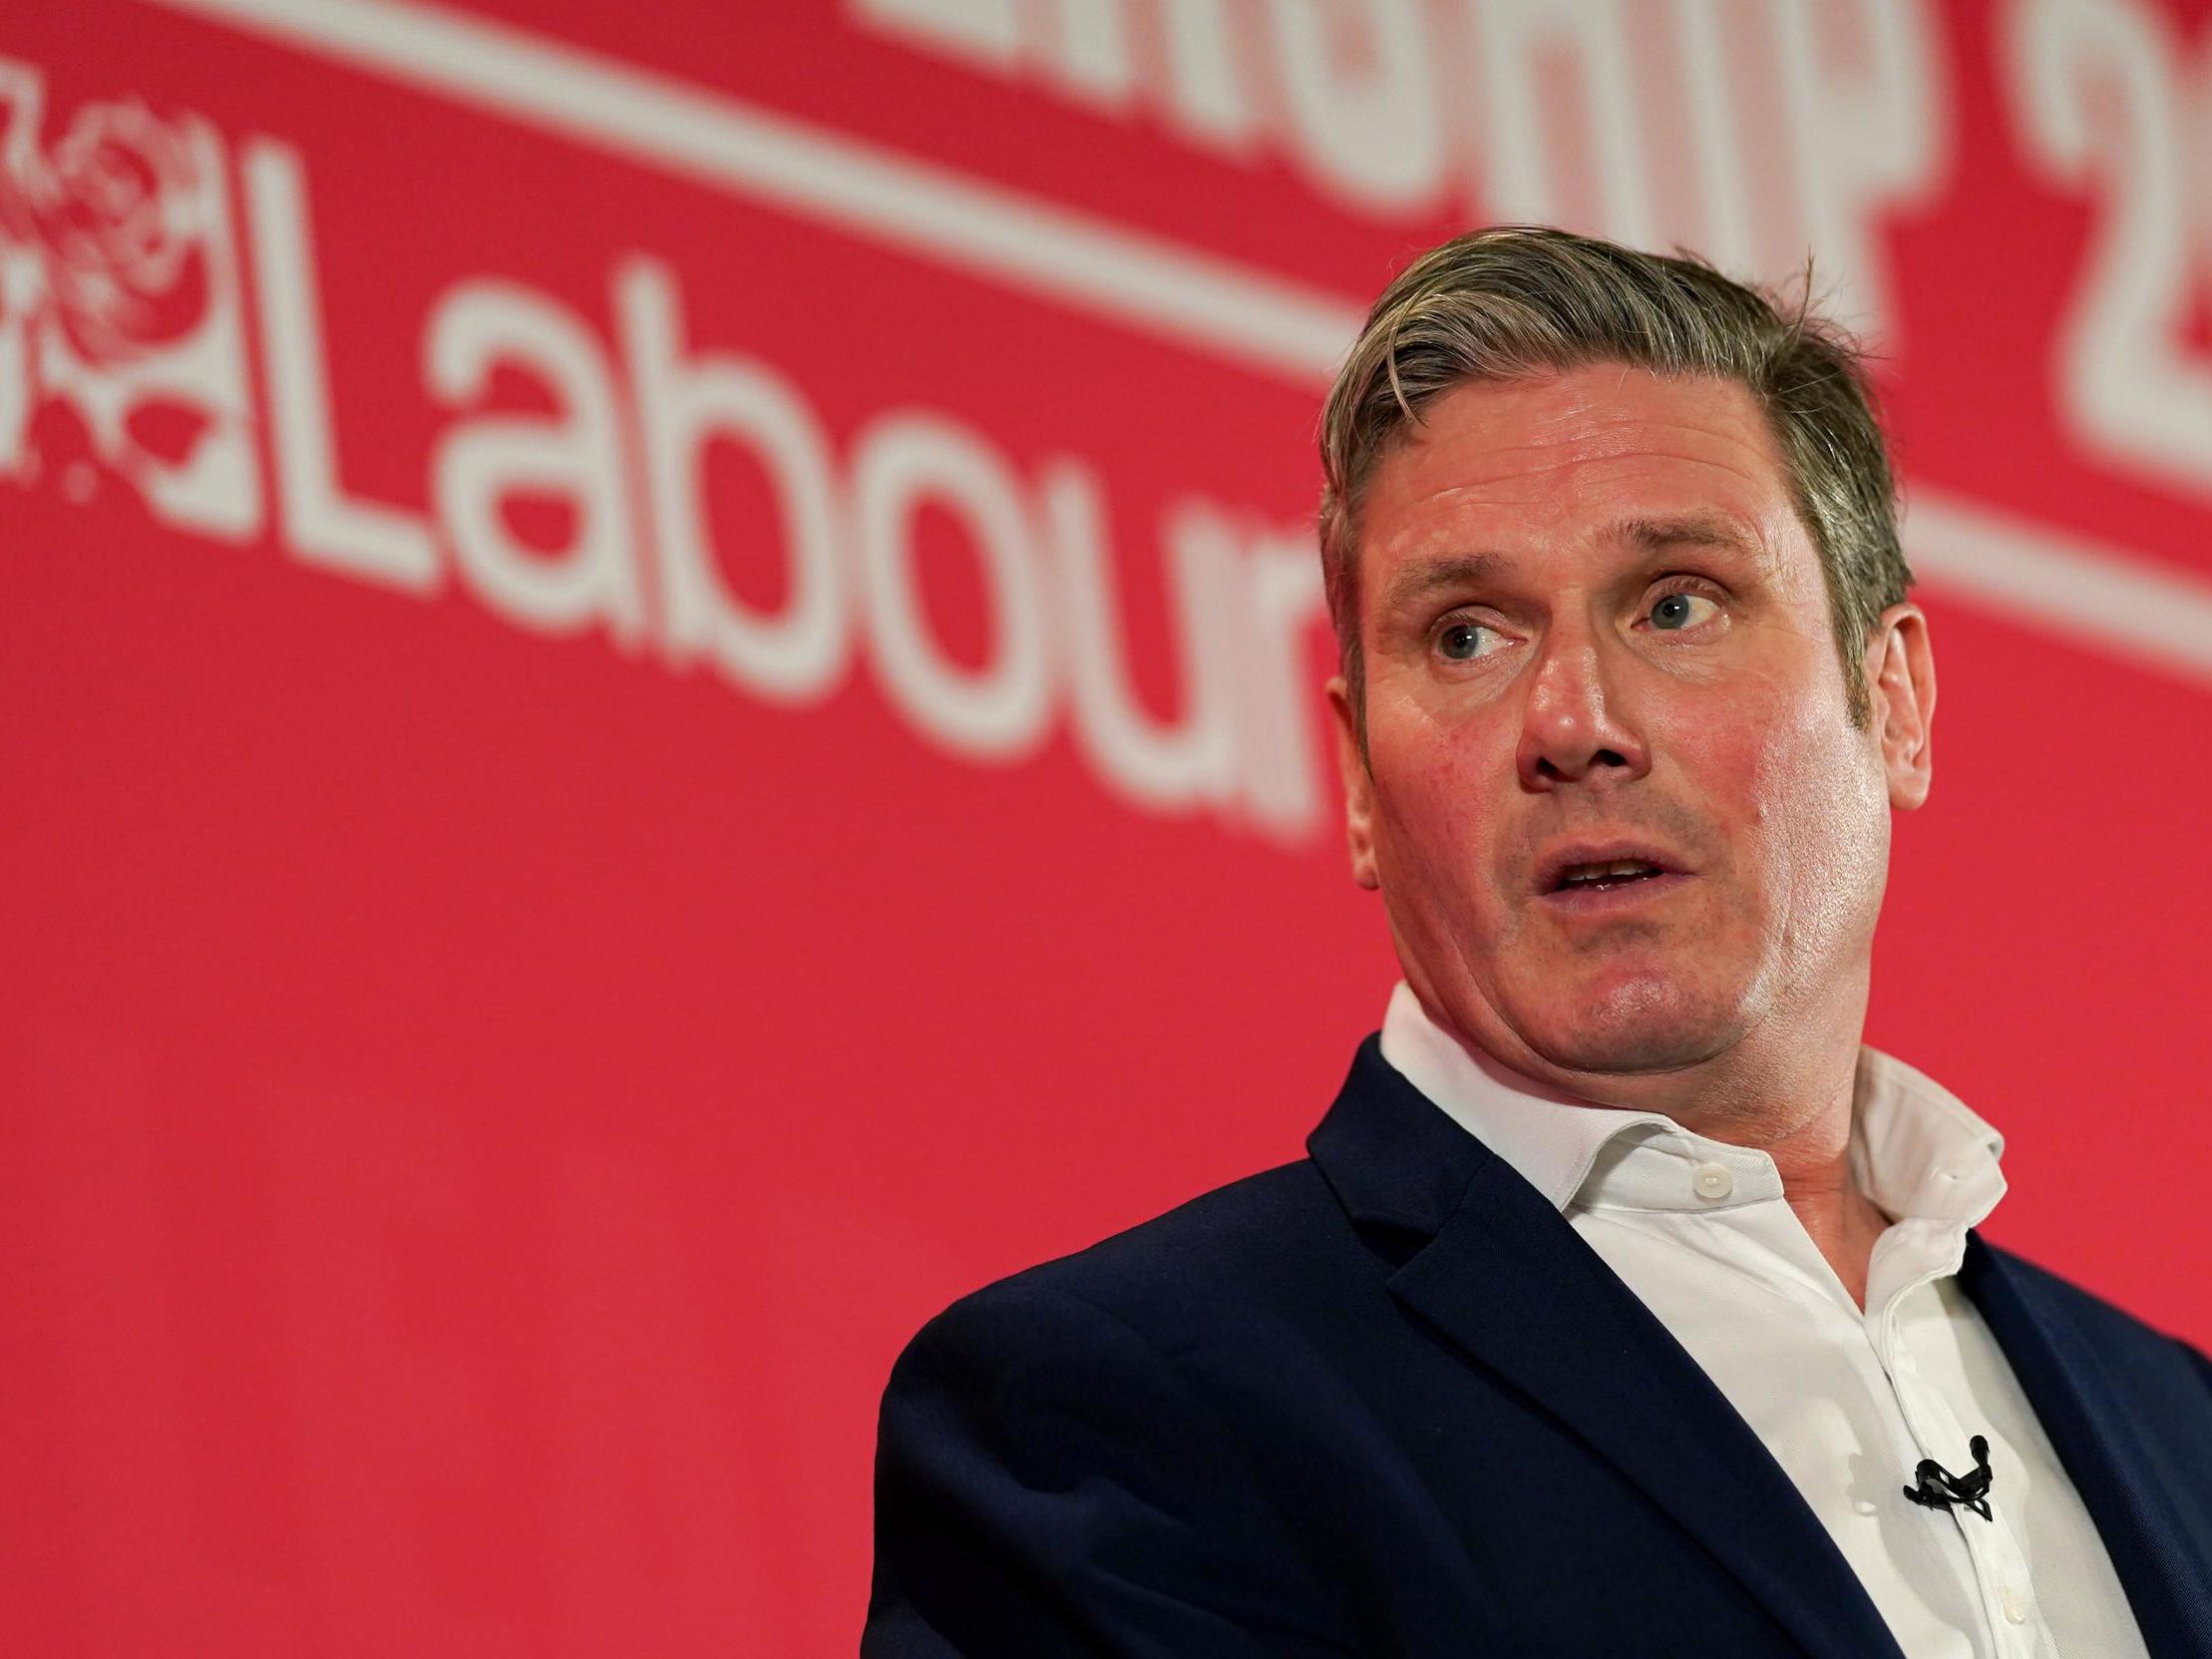 Starmer is choosing not to make hay out of the pandemic